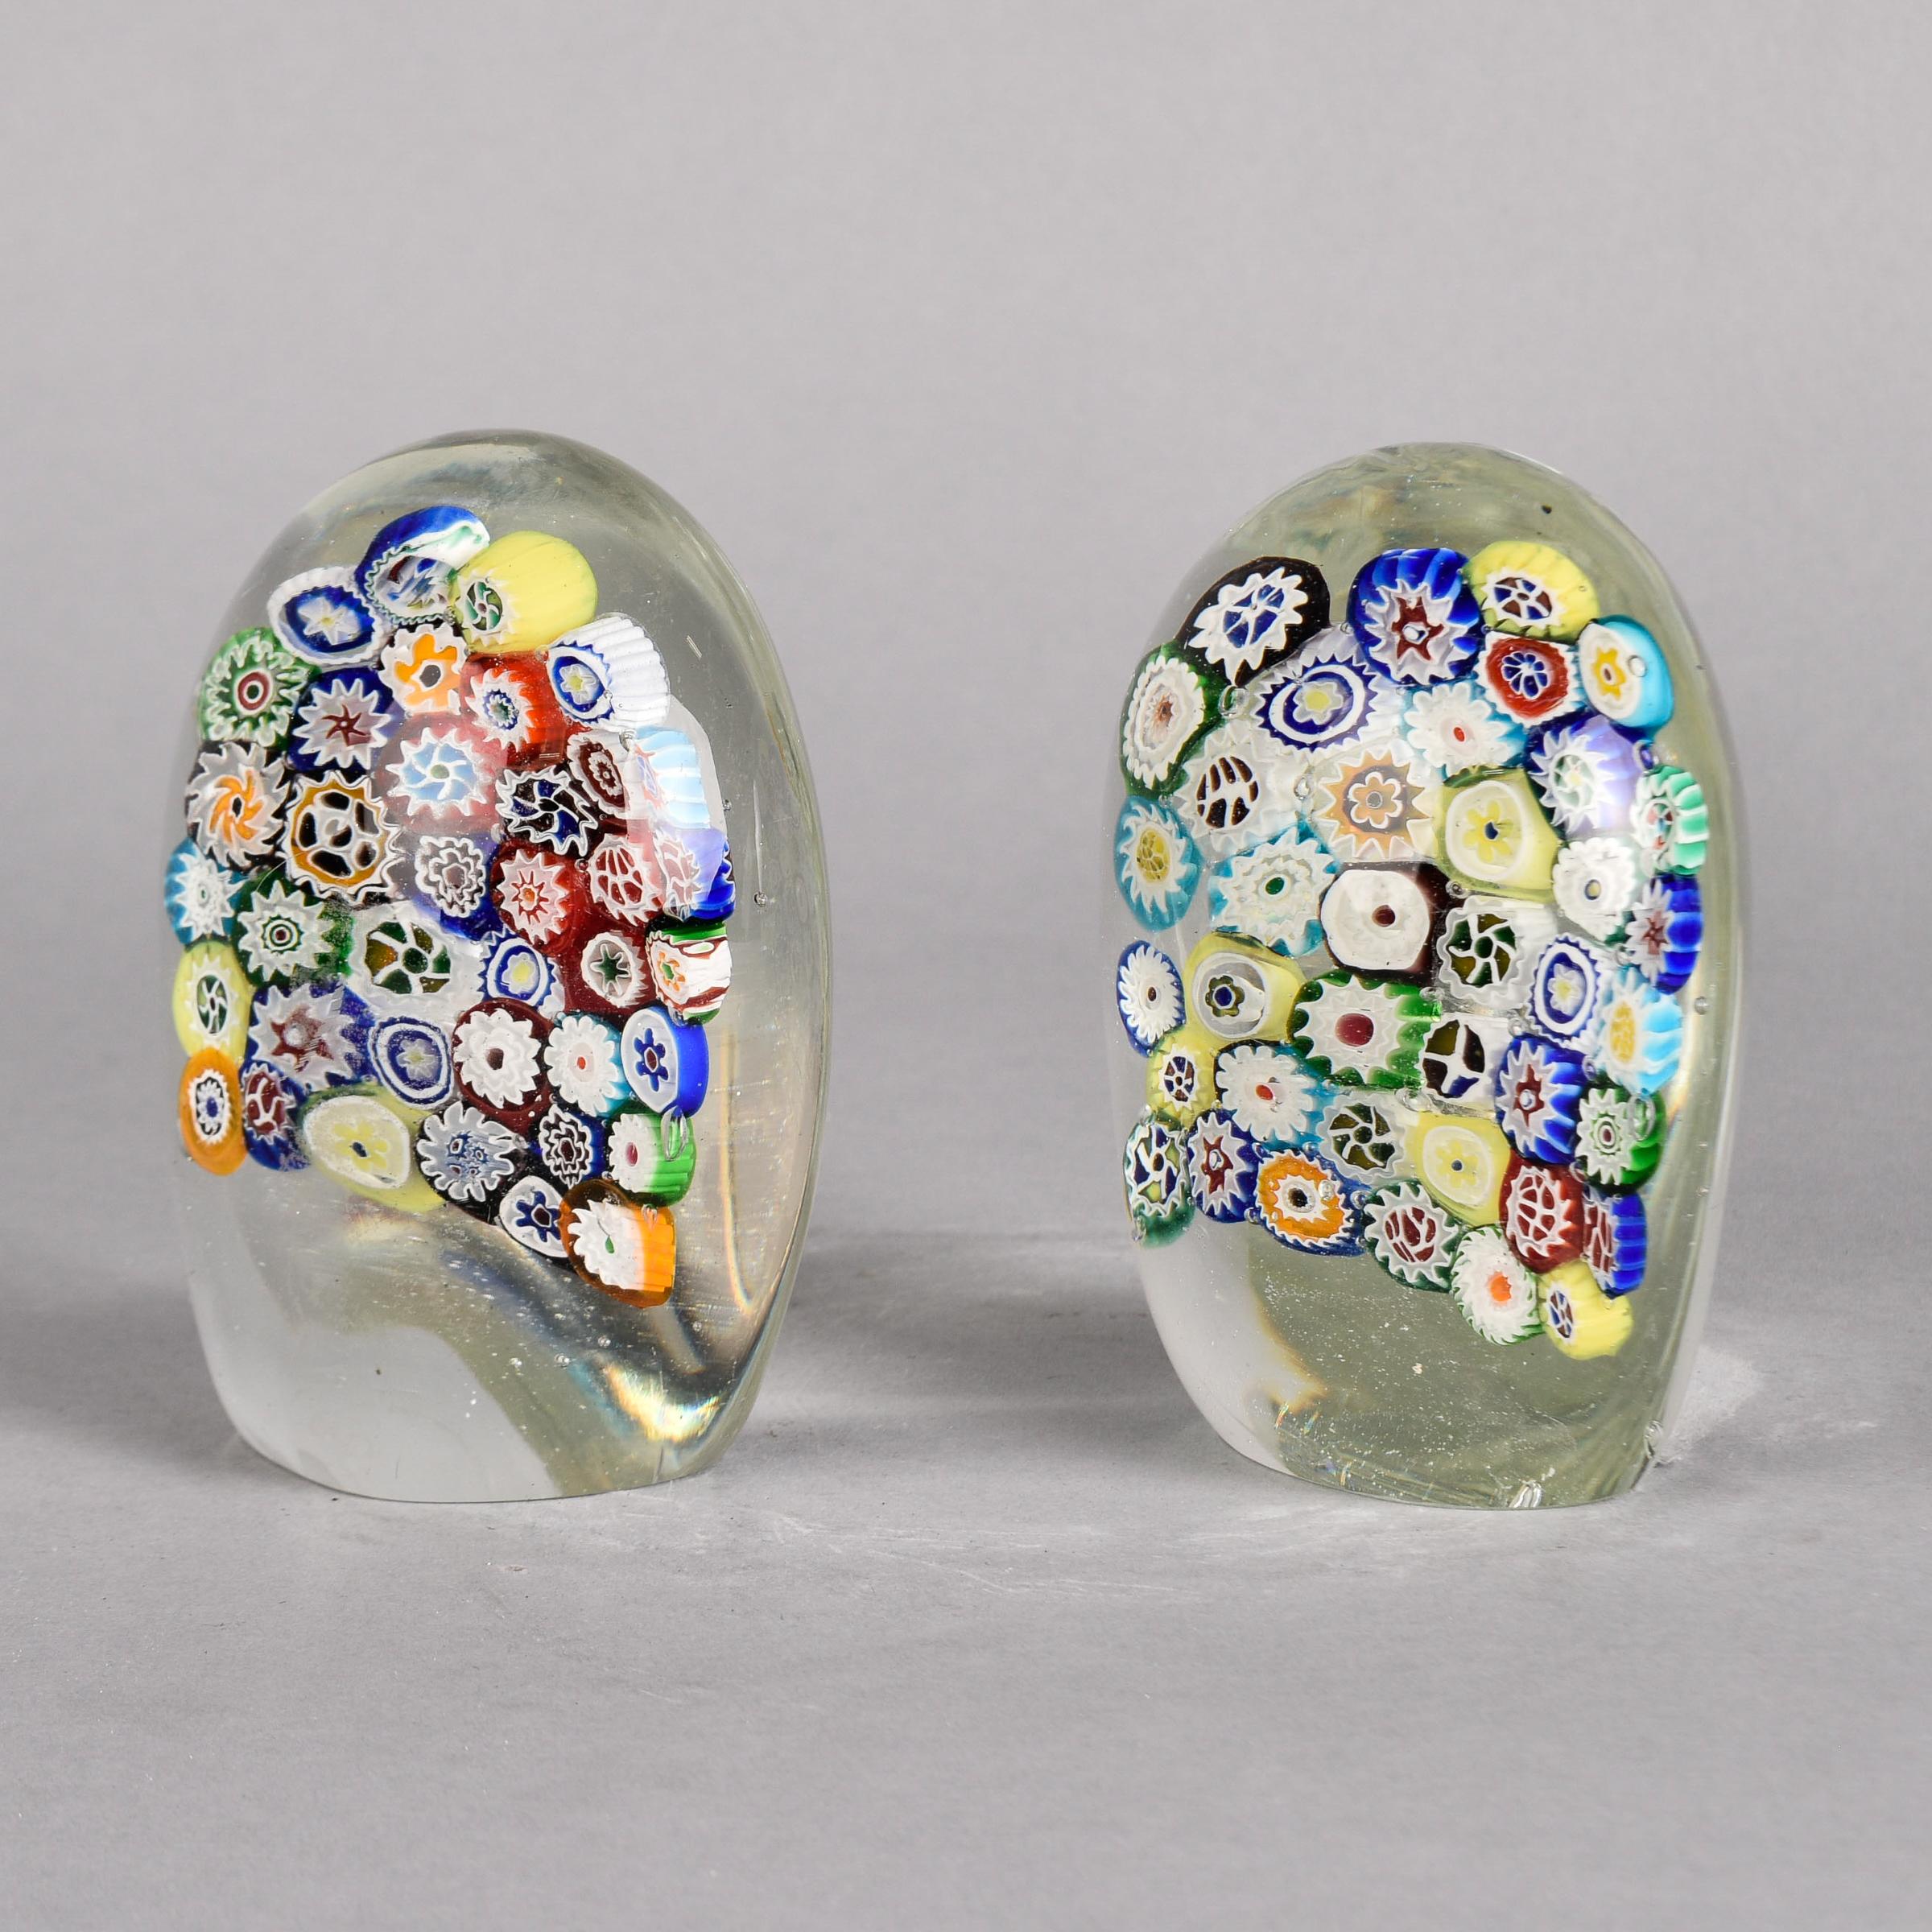 Found in Italy, this pair of millefiori (thousand flowers) bookends have multi color murine flowers suspended in clear, heavy Murano glass. Oval shape with flat base and flat inside edge that supports the books. Sold and priced as a pair. Makes a